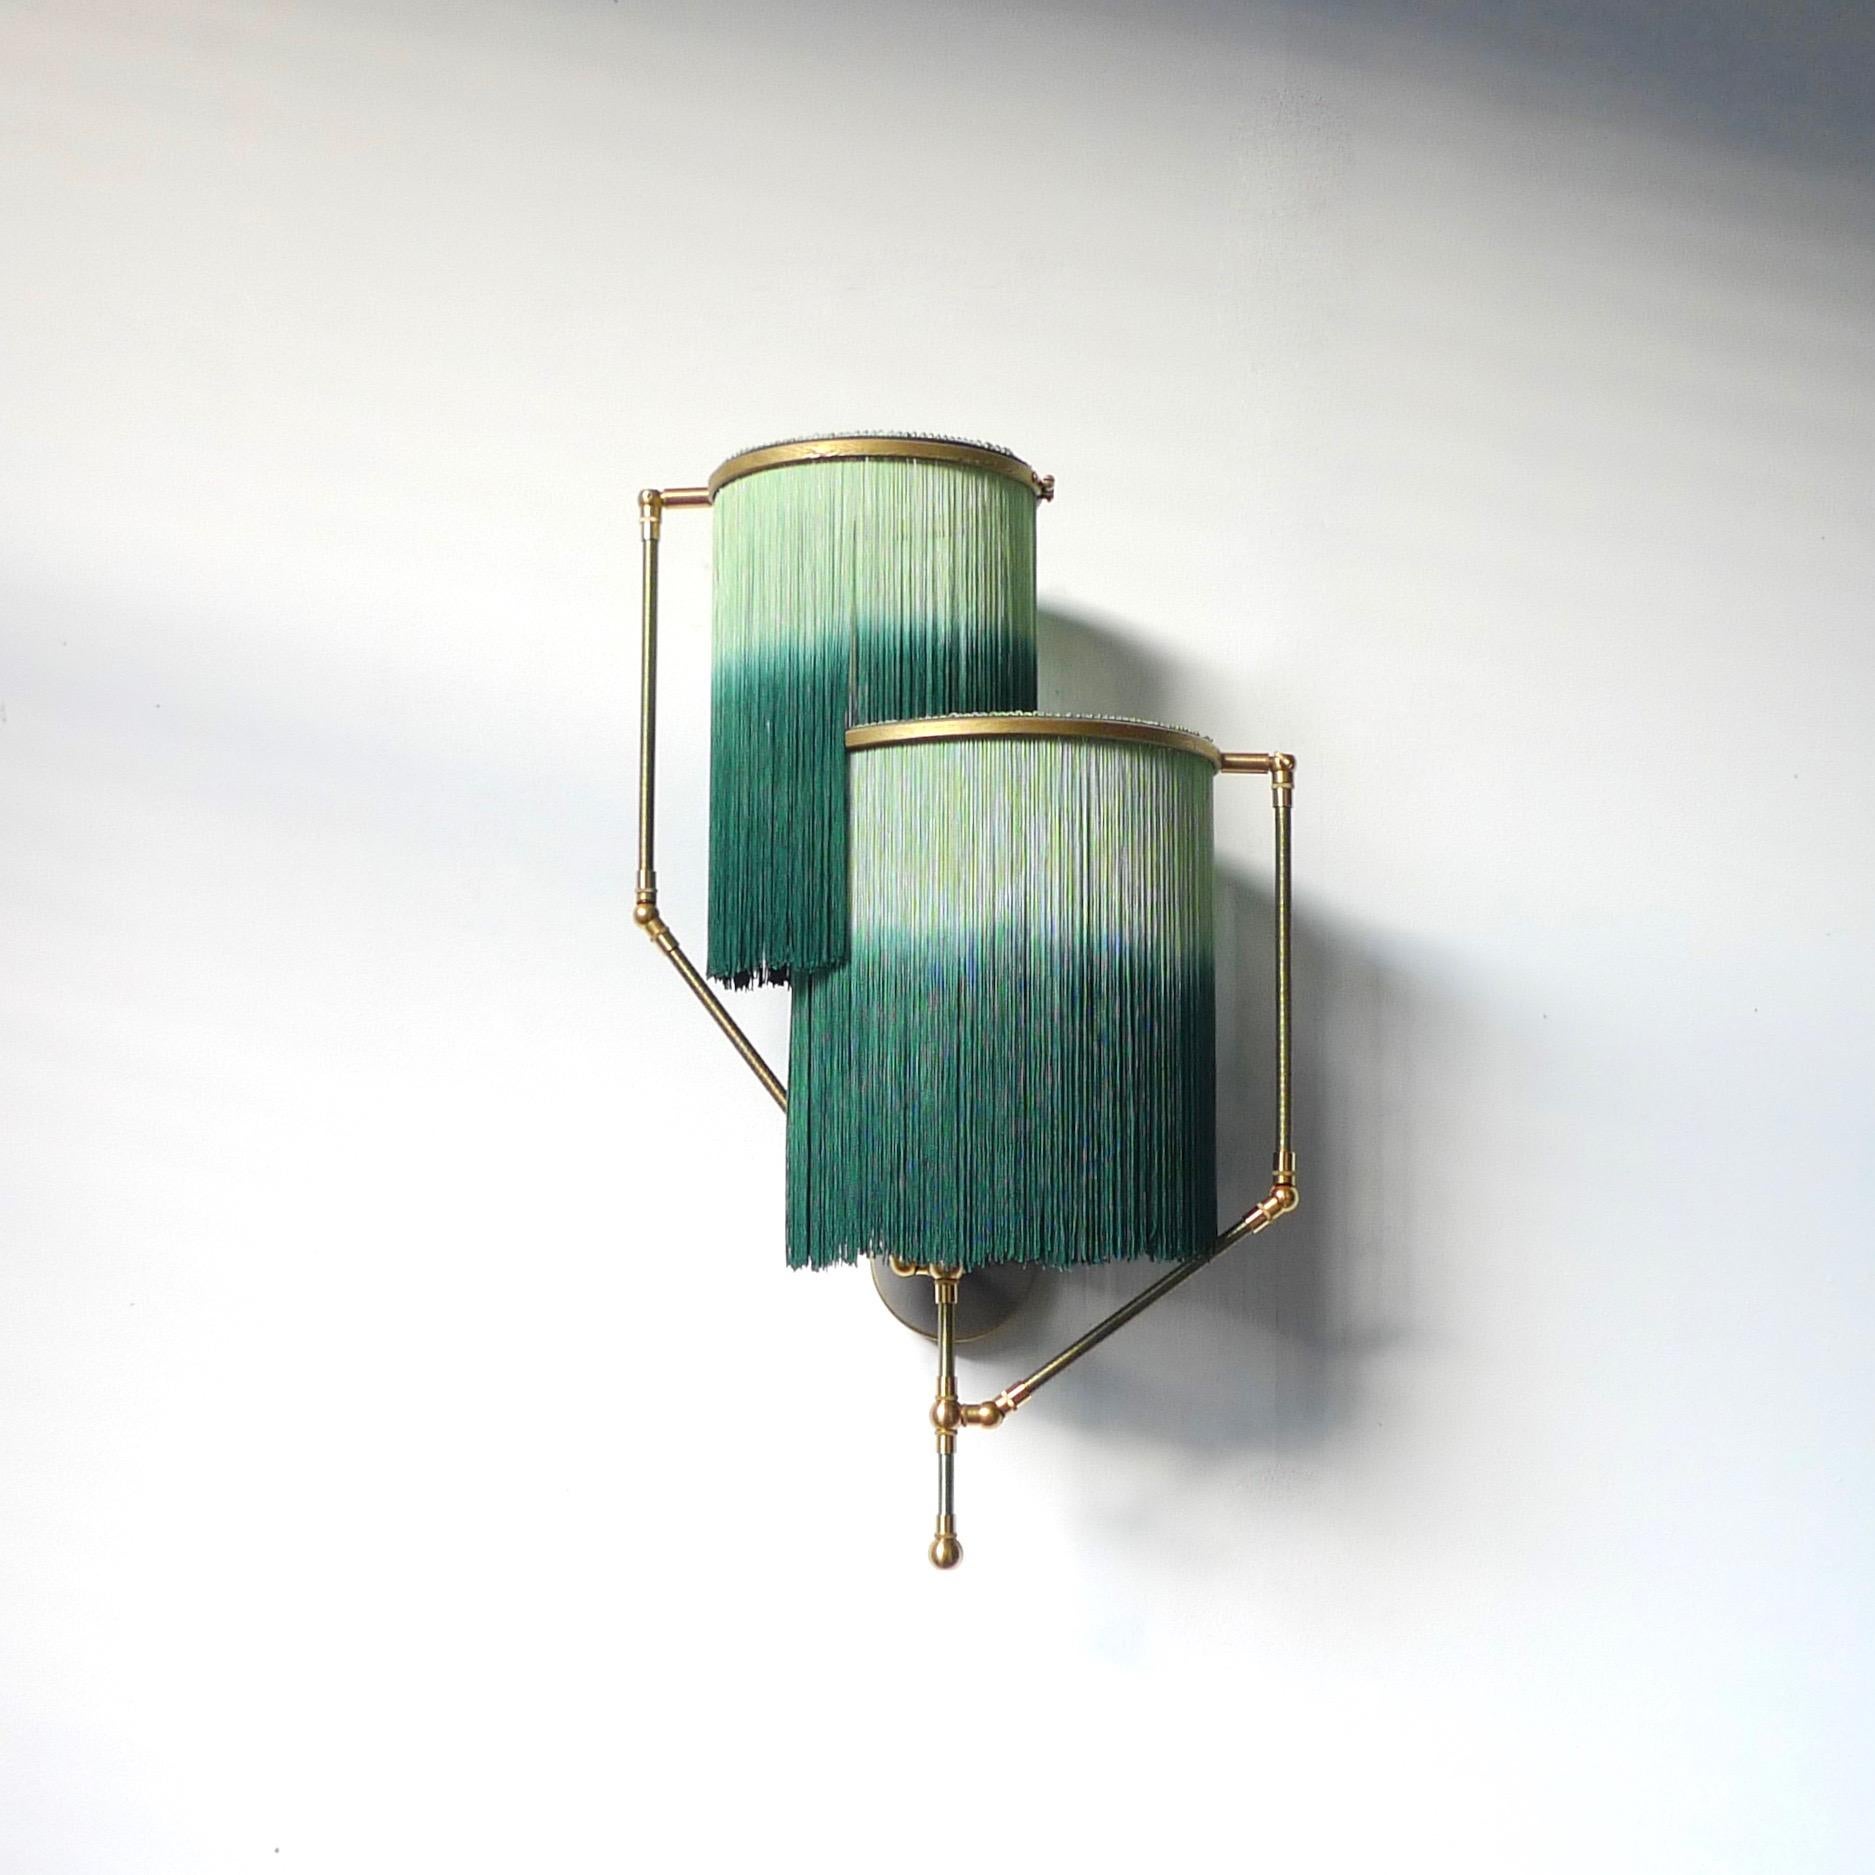 Green charme sconce lamp, Sander Bottinga

Dimensions: 50 x W 38 x D 27 cm
Handmade in brass, leather, wood and dip dyed colored Fringes in viscose.
The movable arms makes it possible to move the circles with fringes in different positions.
So you